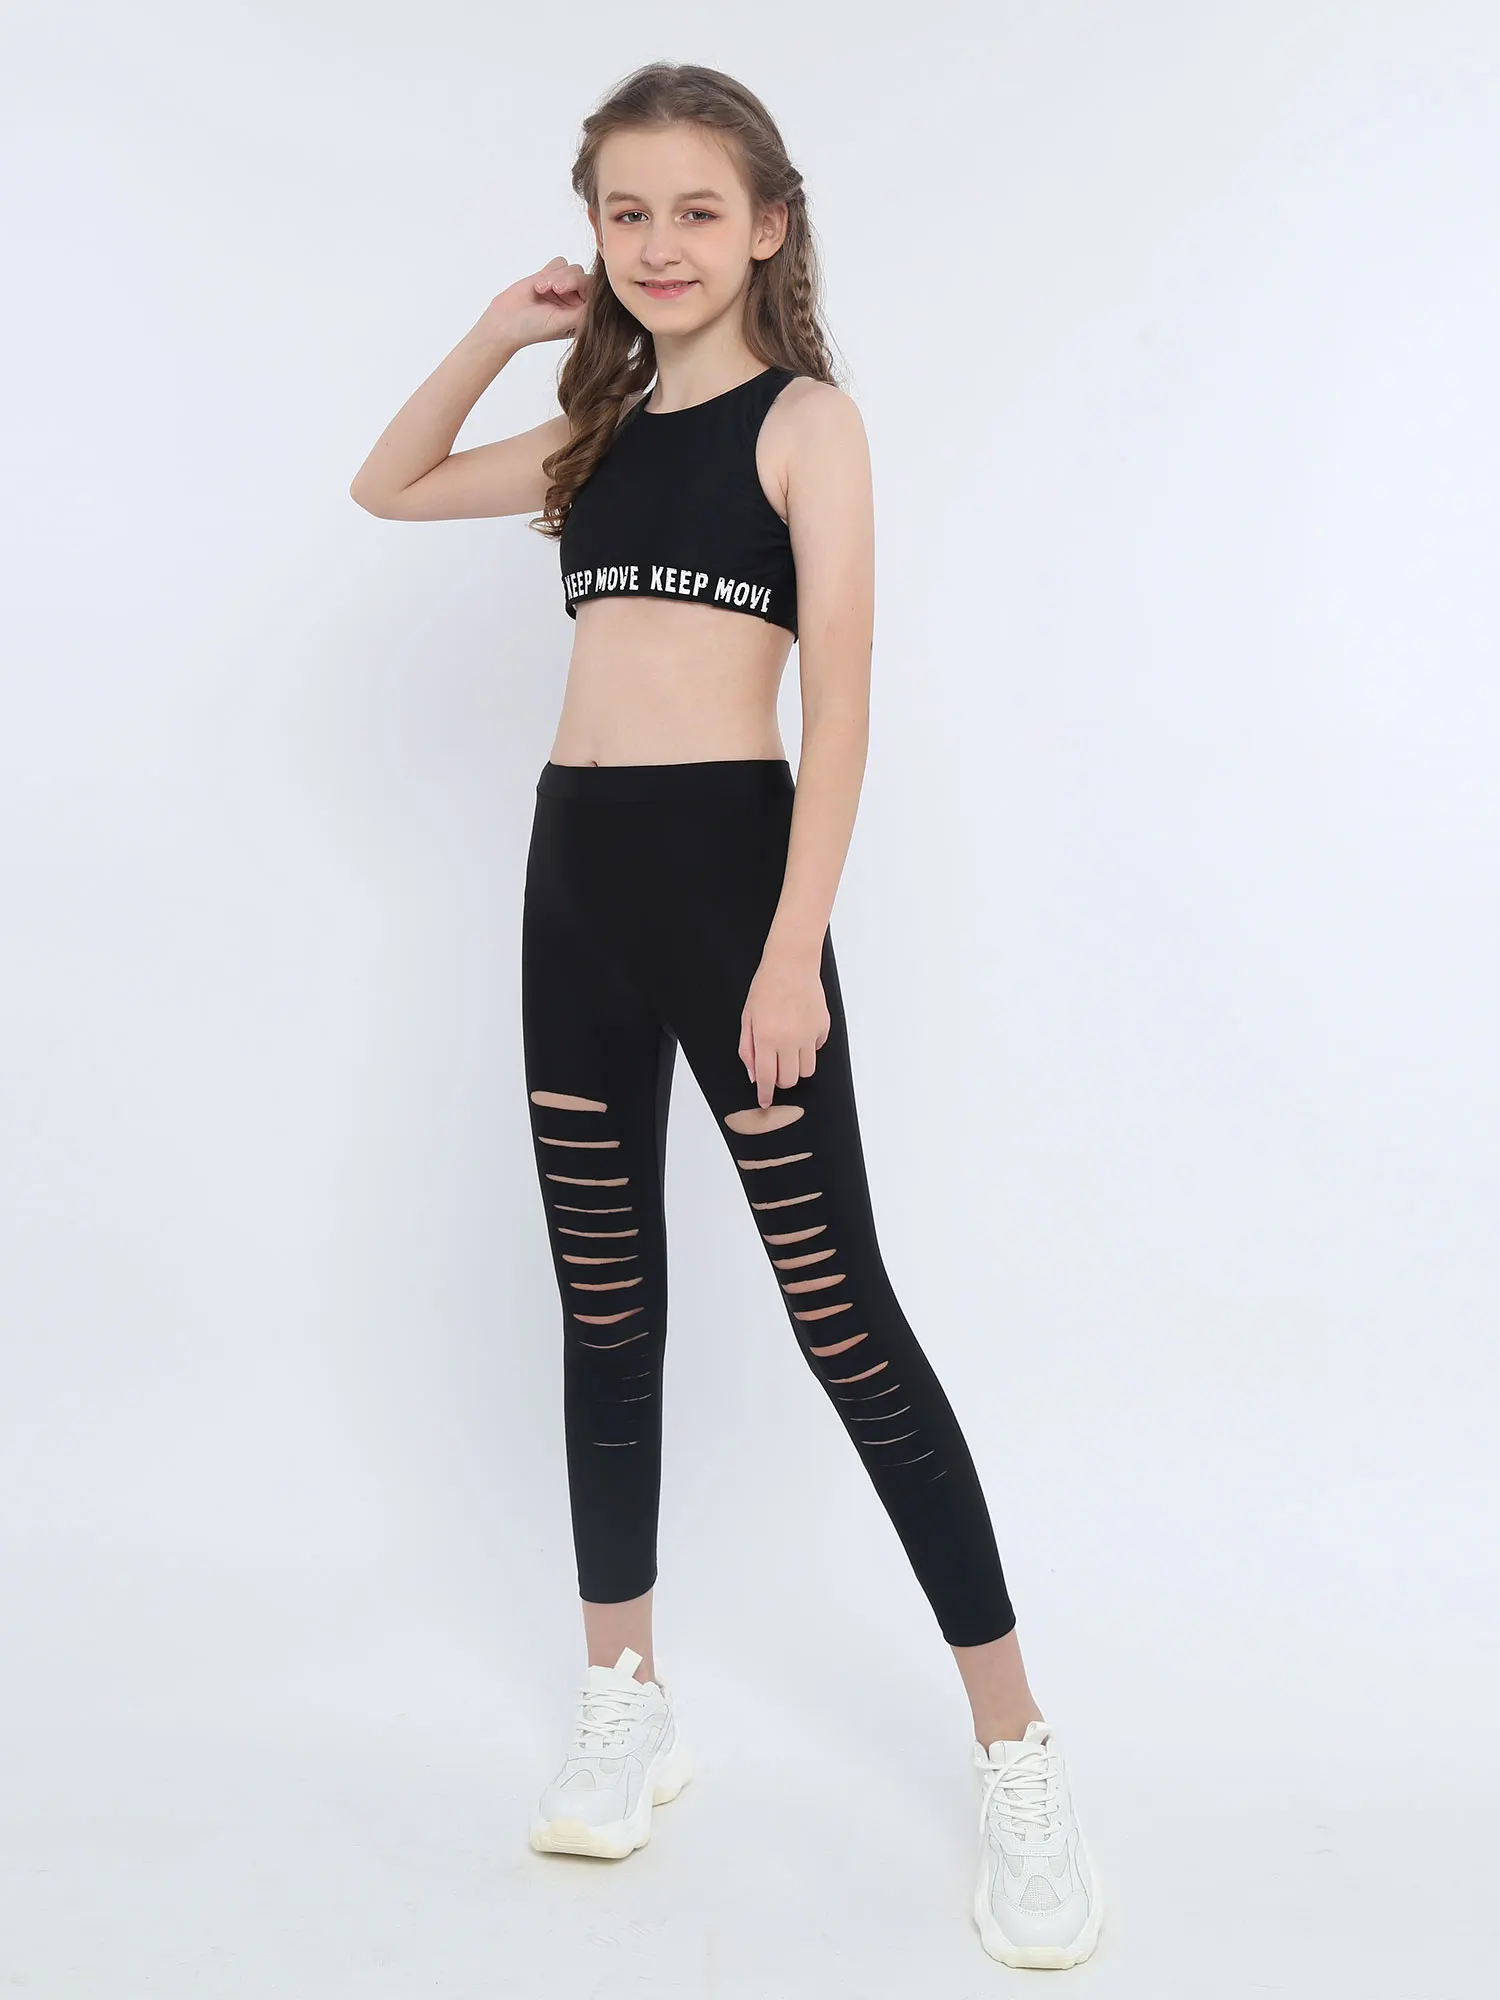 clothing sets black	 Yoga Sets Clothes Girl Sportswear Tracksuits for Children fitness suit Kids Sport Outfit Gym Crop Top with Leggings Running Sets baby boy clothing sets cheap	